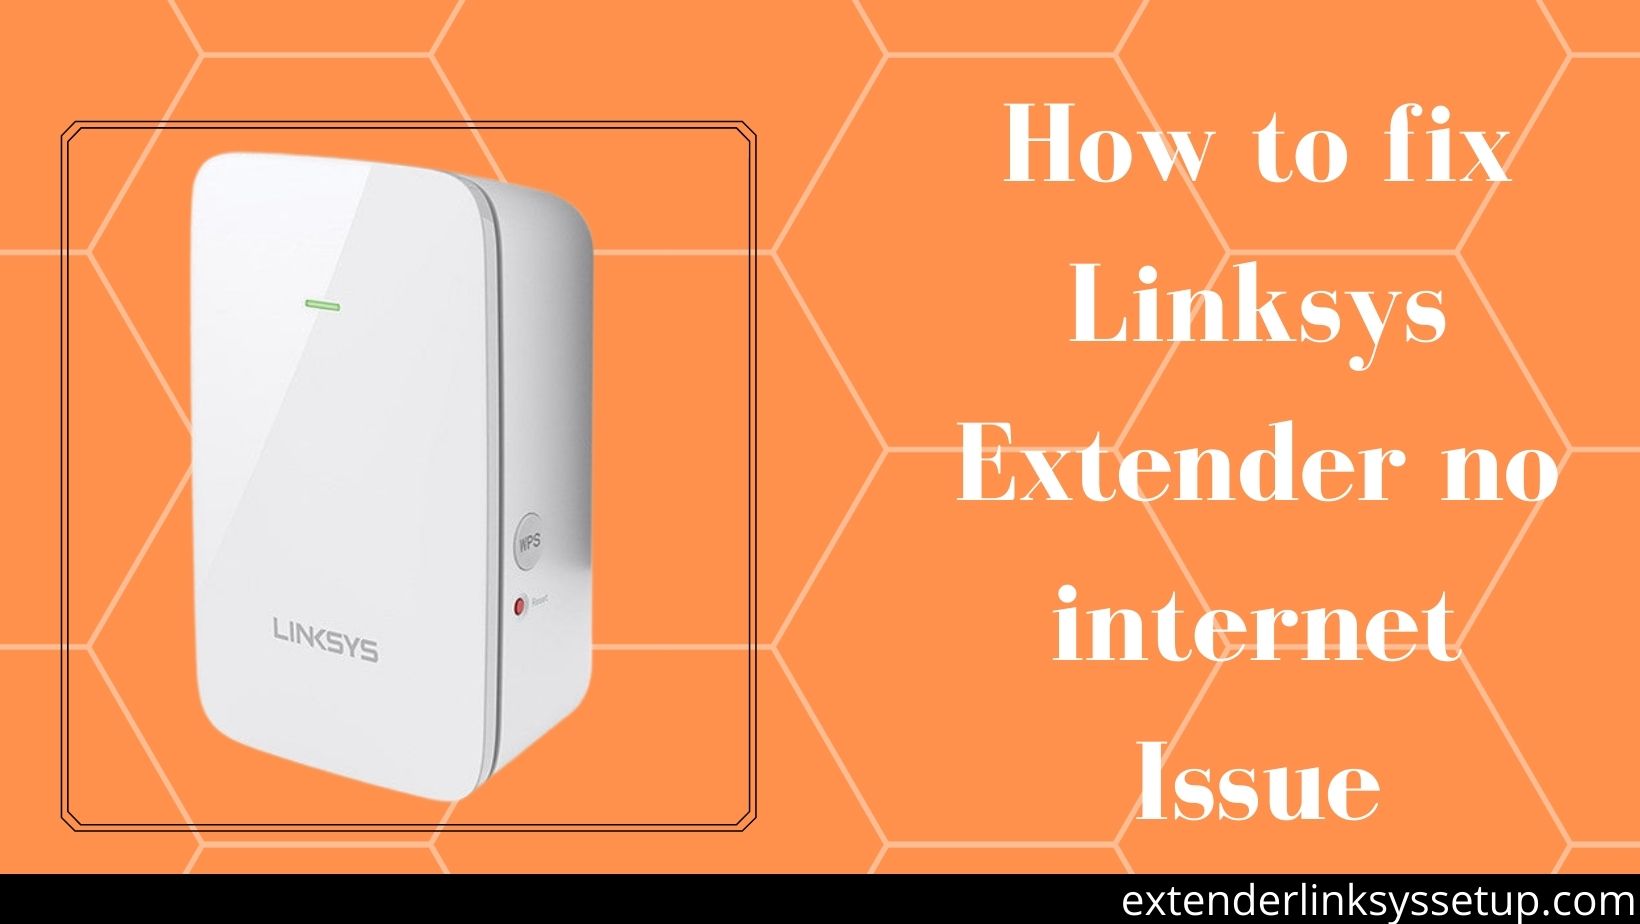 How to fix Linksys Extender no internet Issue?